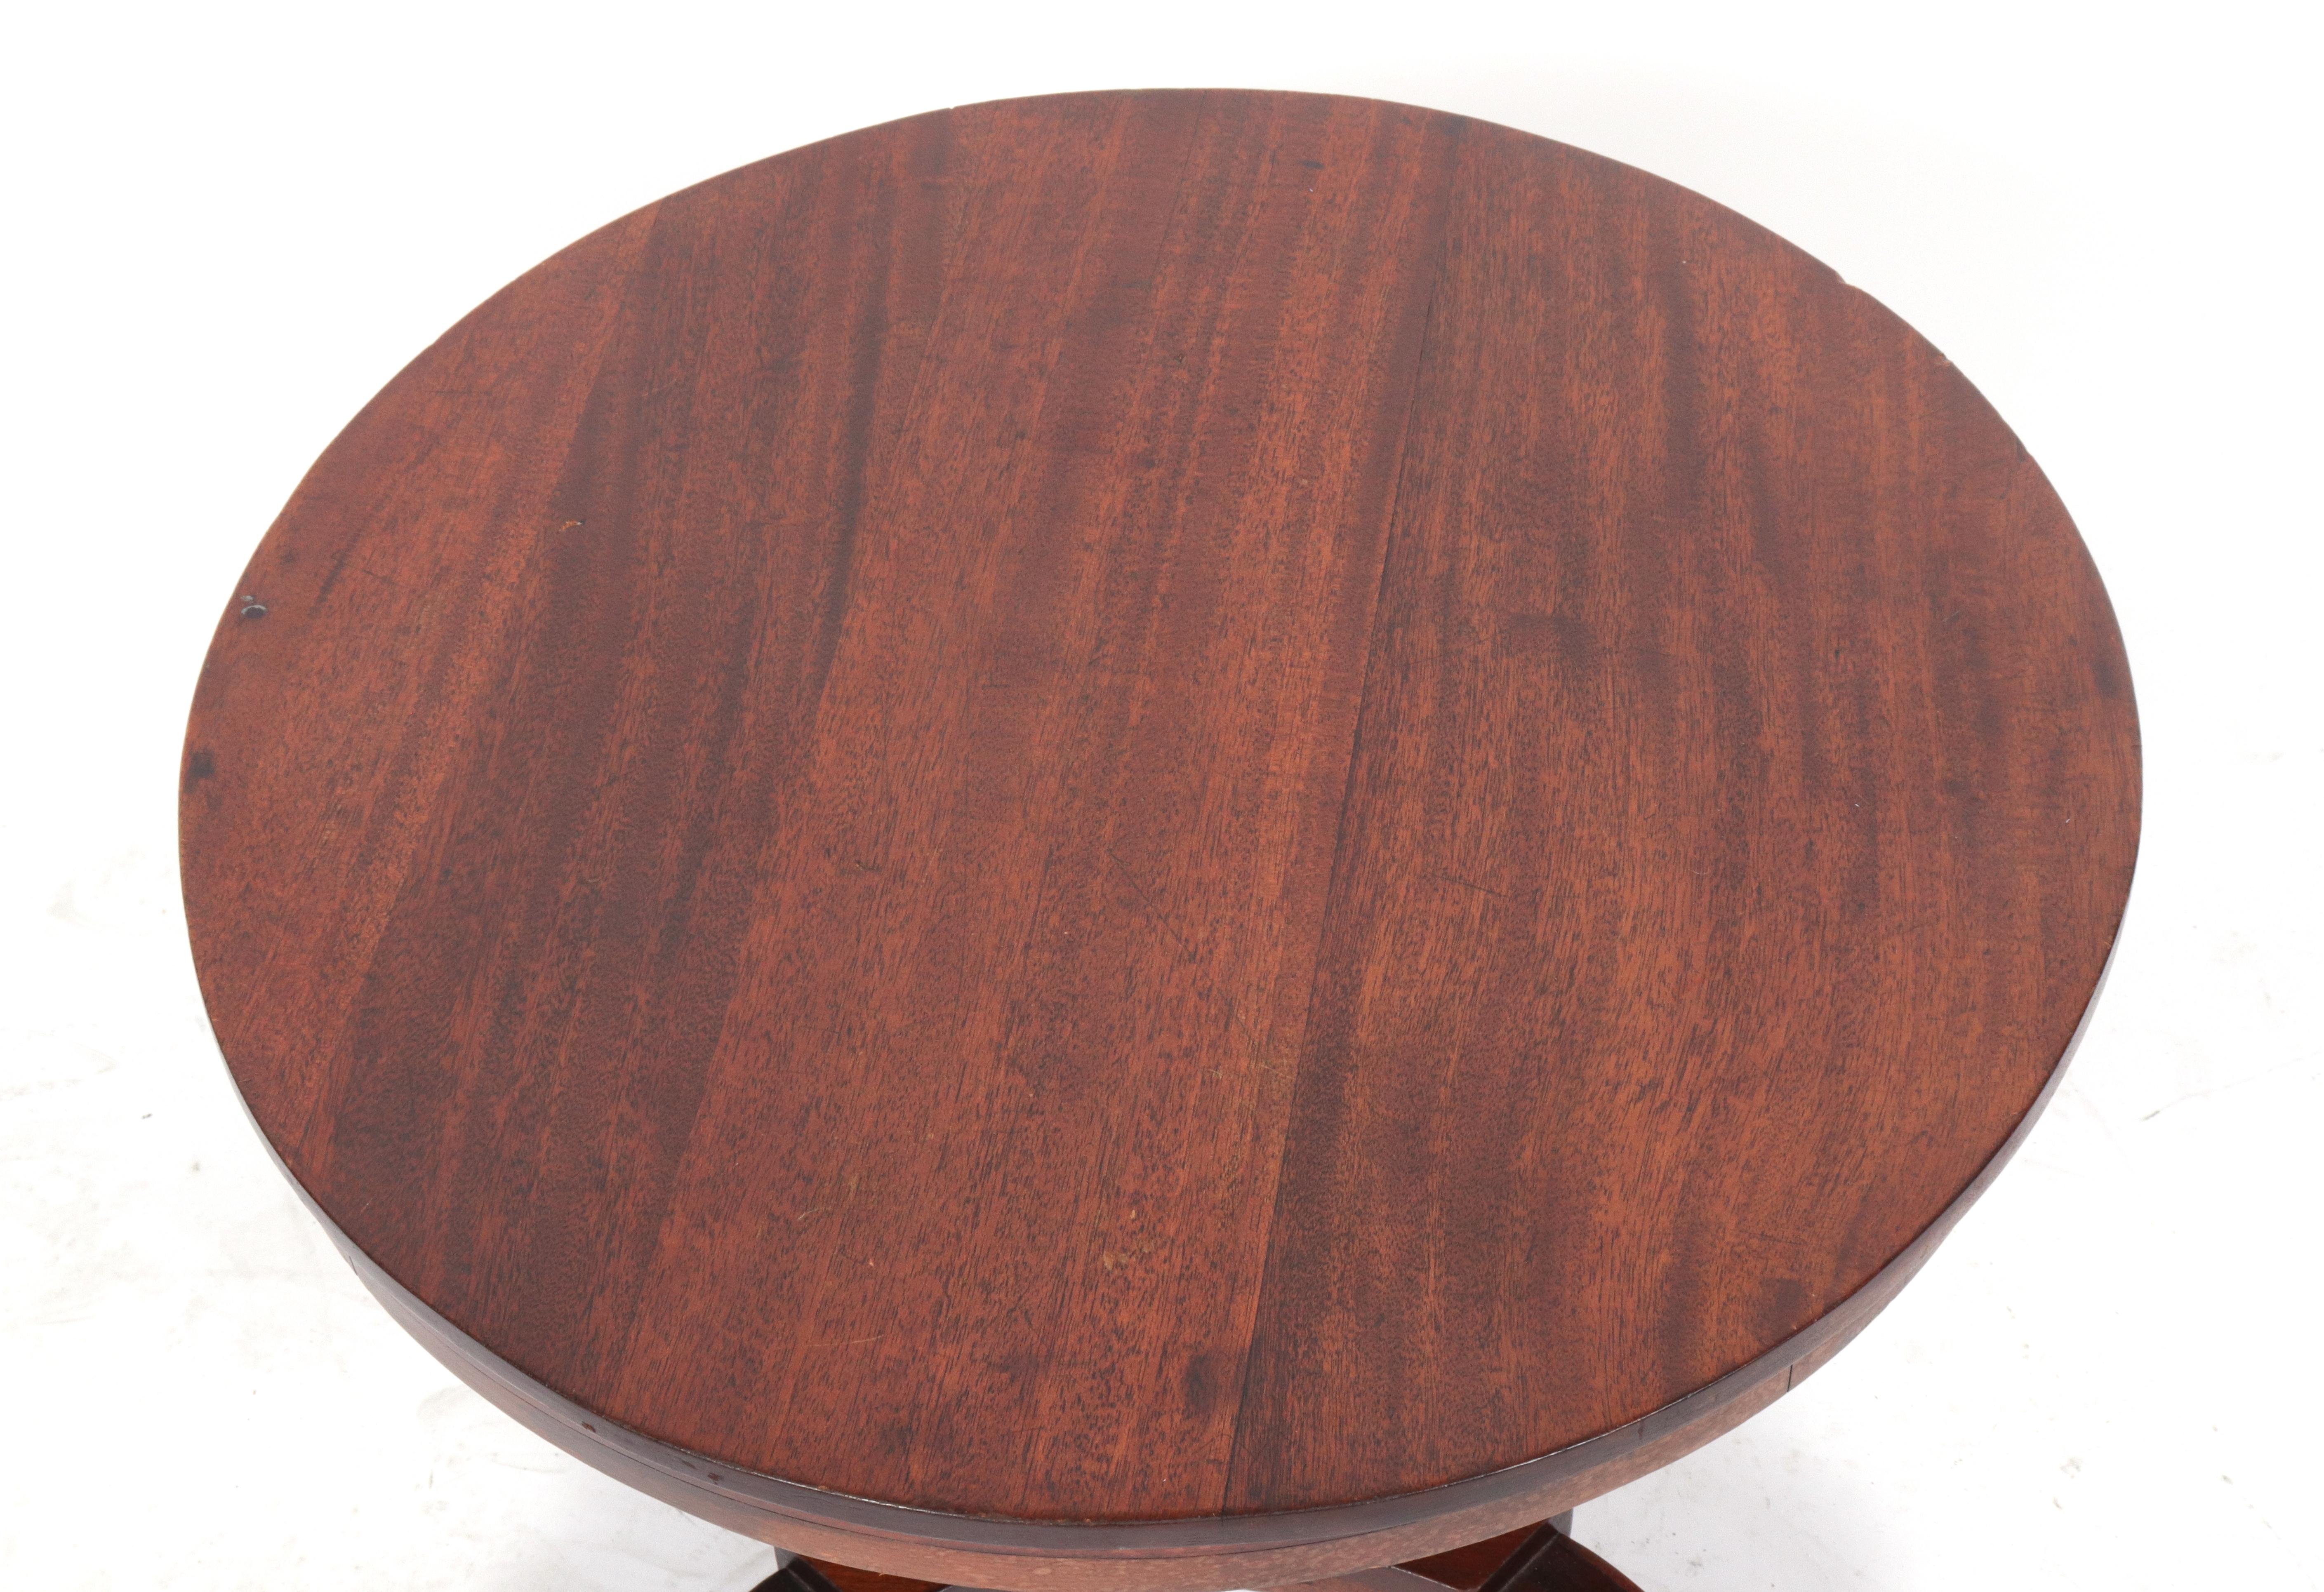 Biedermeier manner round wooden occasional table with pedestal base.